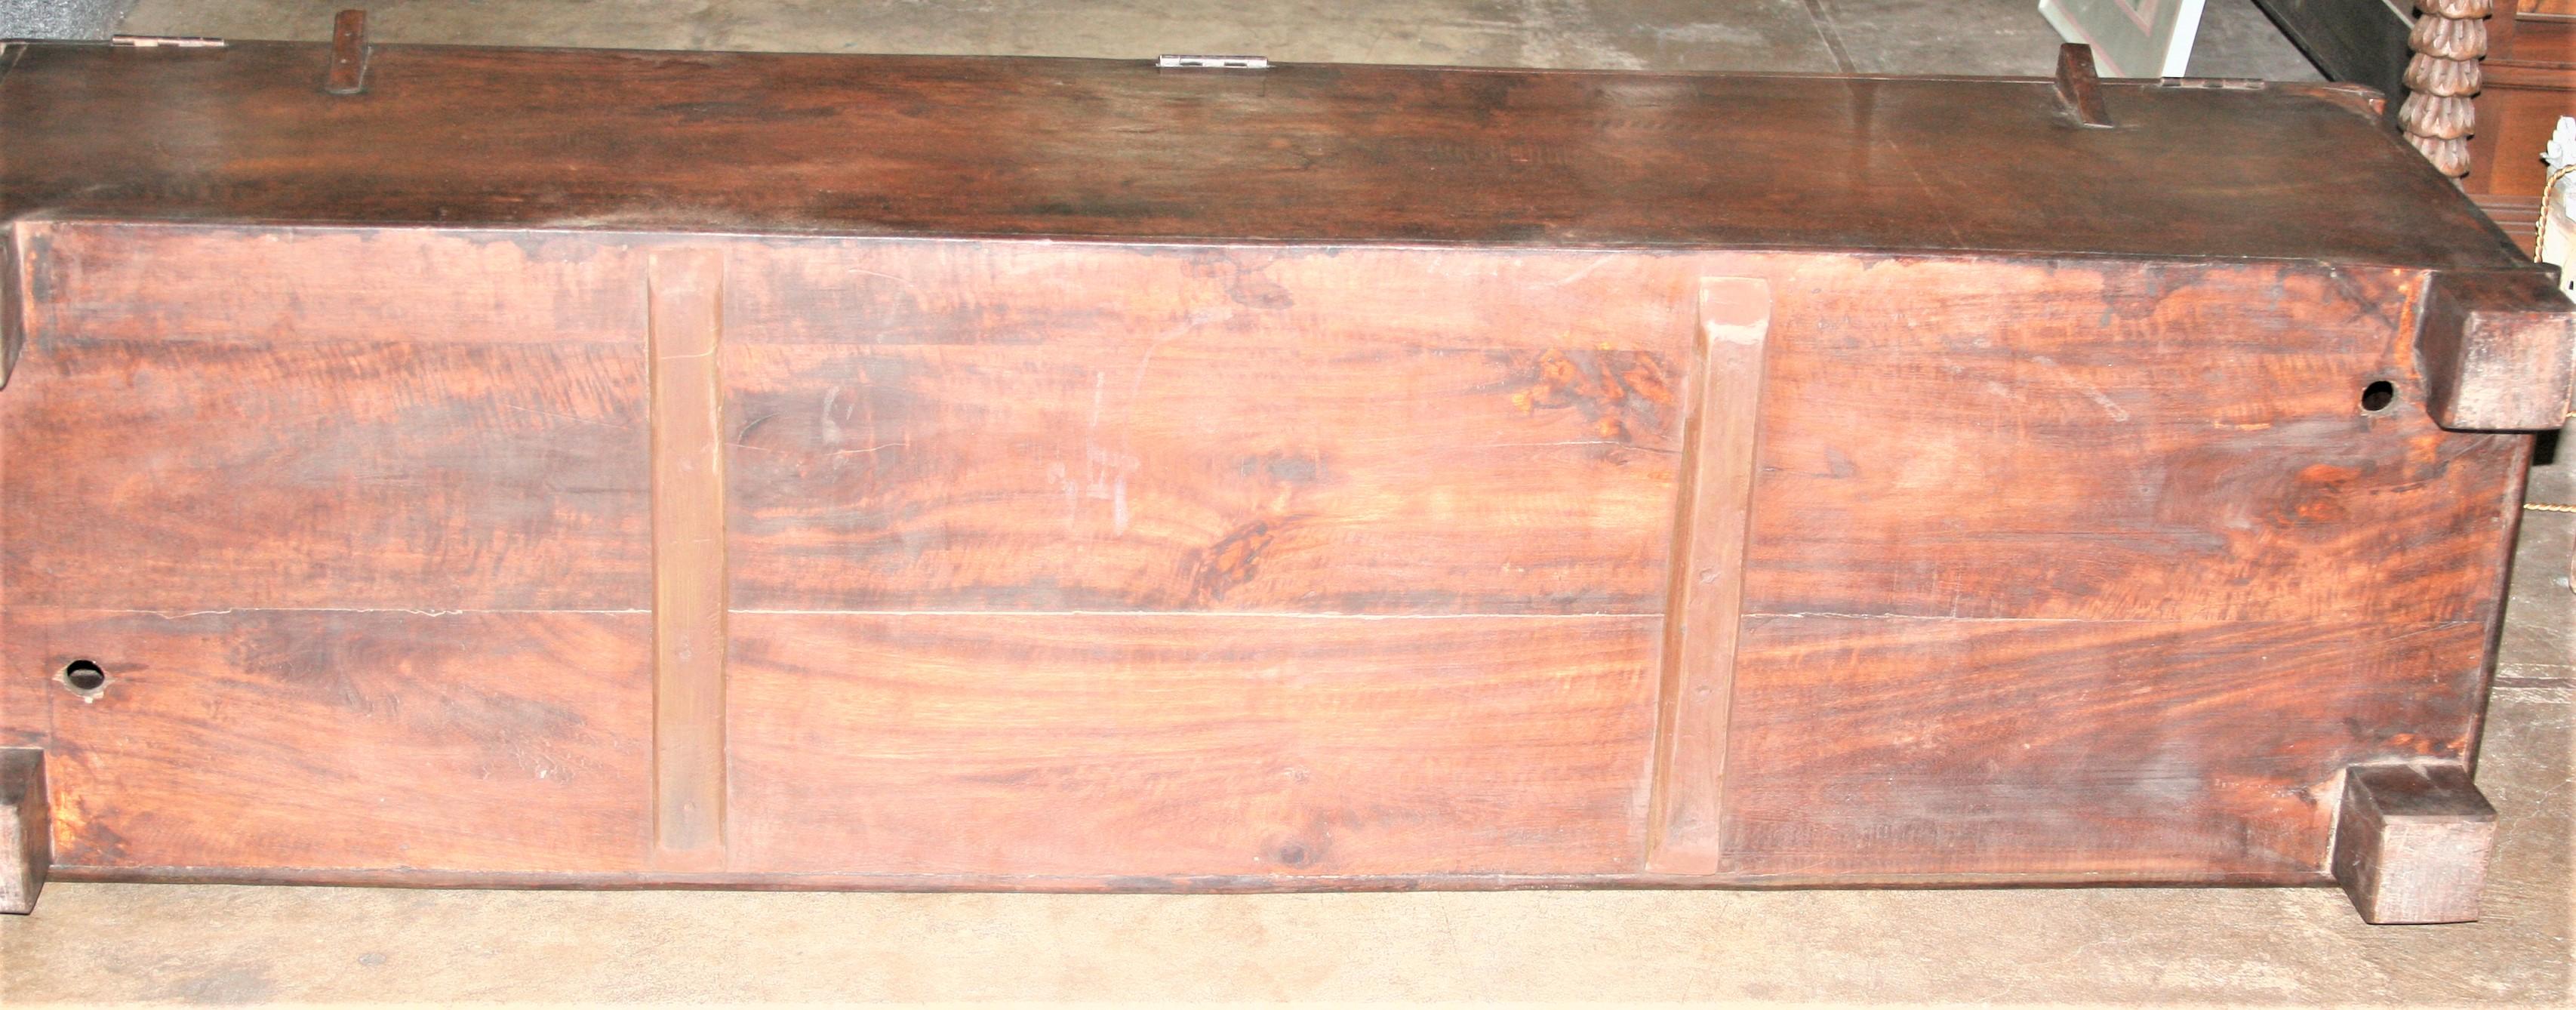 19th Century Solid Teak Wood Linen Chest Modified as Bench with Storage 8